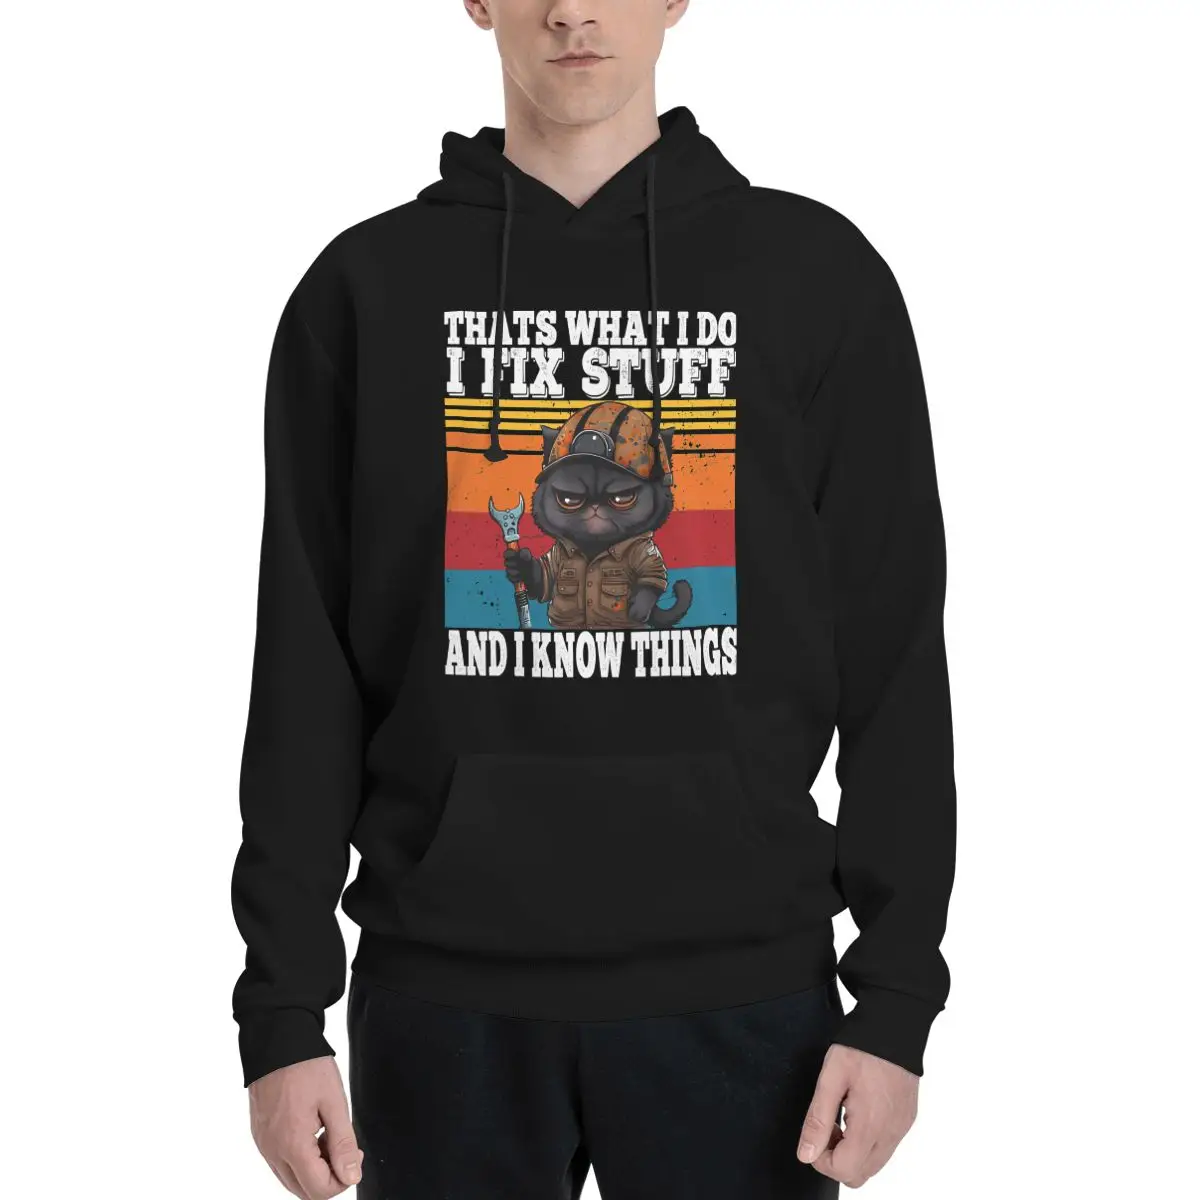 

Thats What I Do I Fix Stuff And I Know Things Polyester Hoodie Men's sweatershirt Warm Dif Colors Sizes